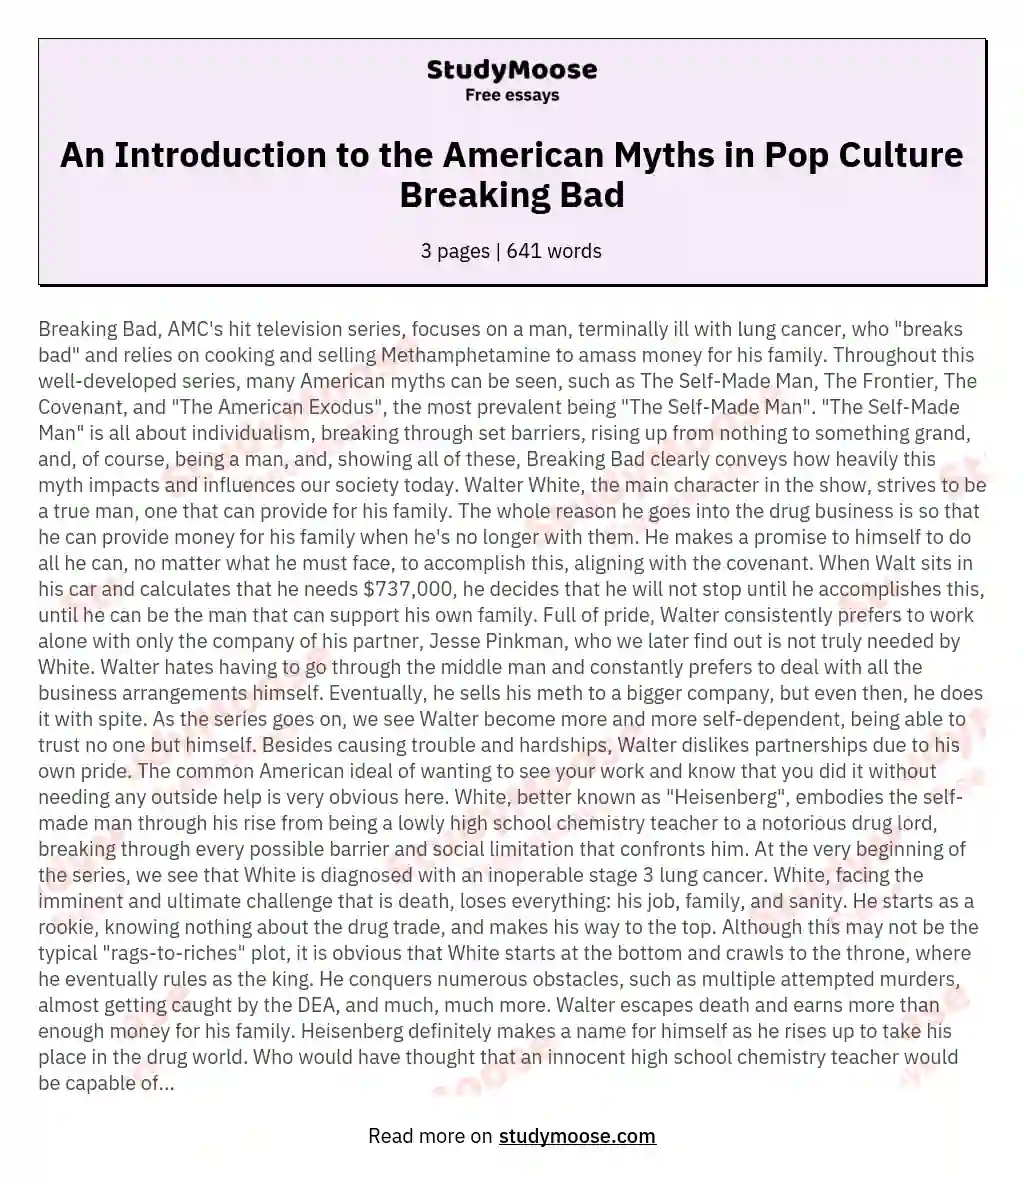 An Introduction to the American Myths in Pop Culture Breaking Bad essay